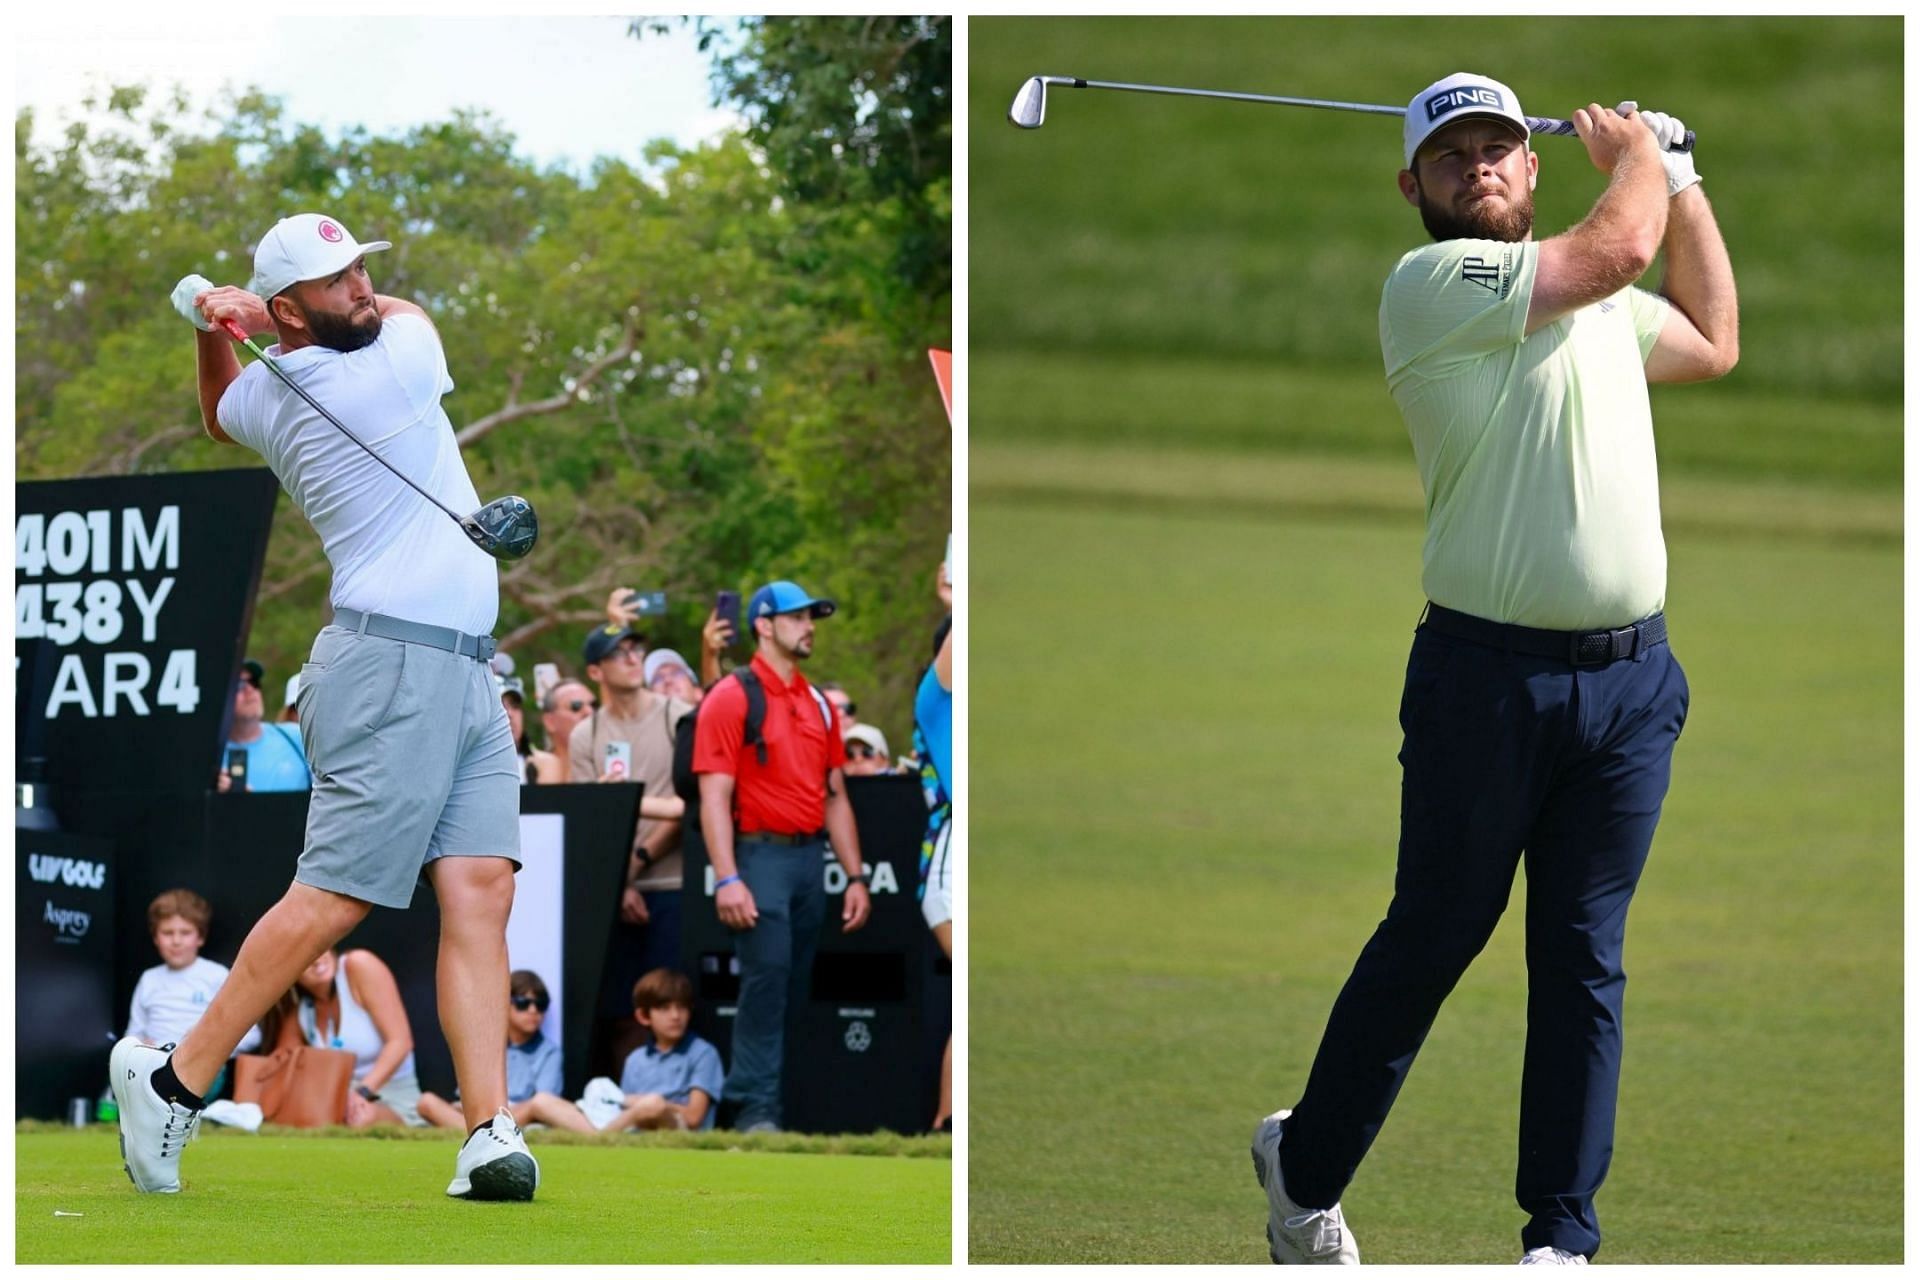 Tyrrell Hatton and Jon Rahm are currently competing at the LIV Golf Las Vegas